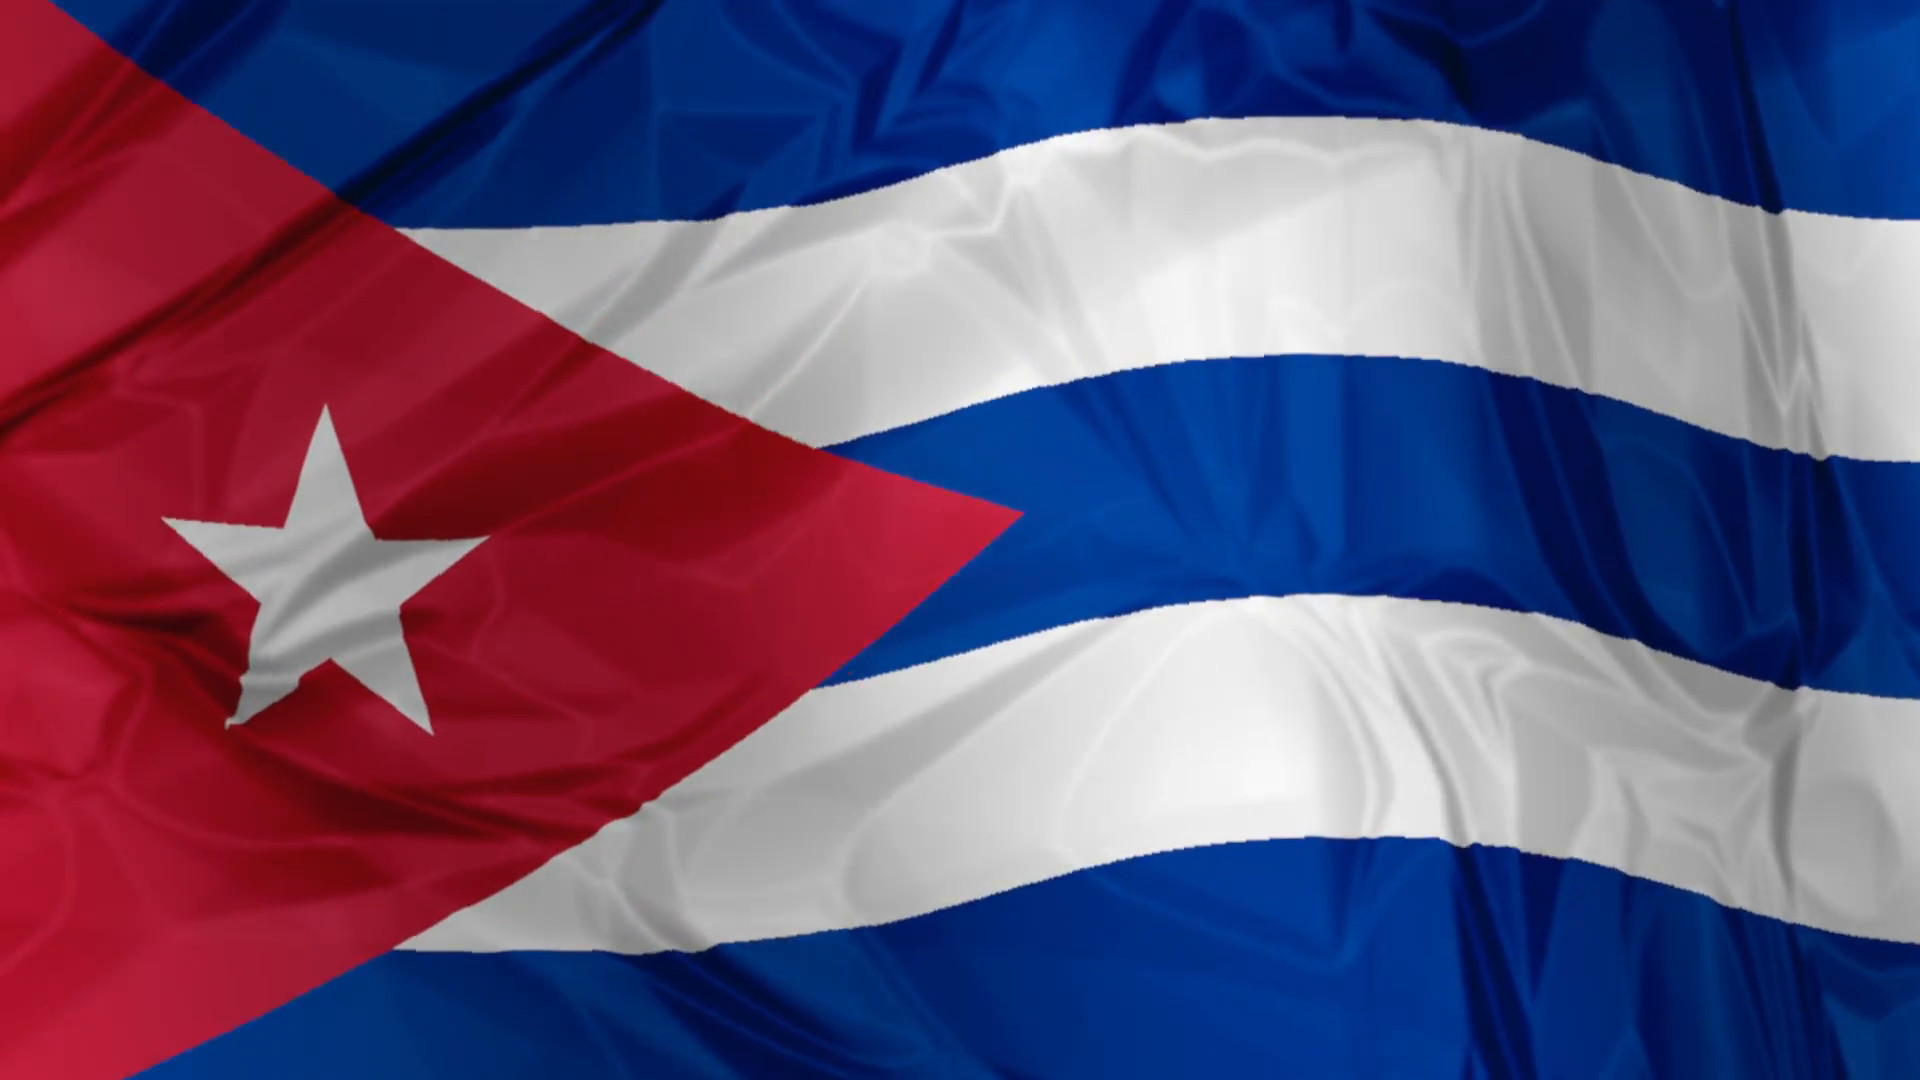 1920x1080 3D waving Cuba flag background red, blue and white colors, Latin America  Caribbean